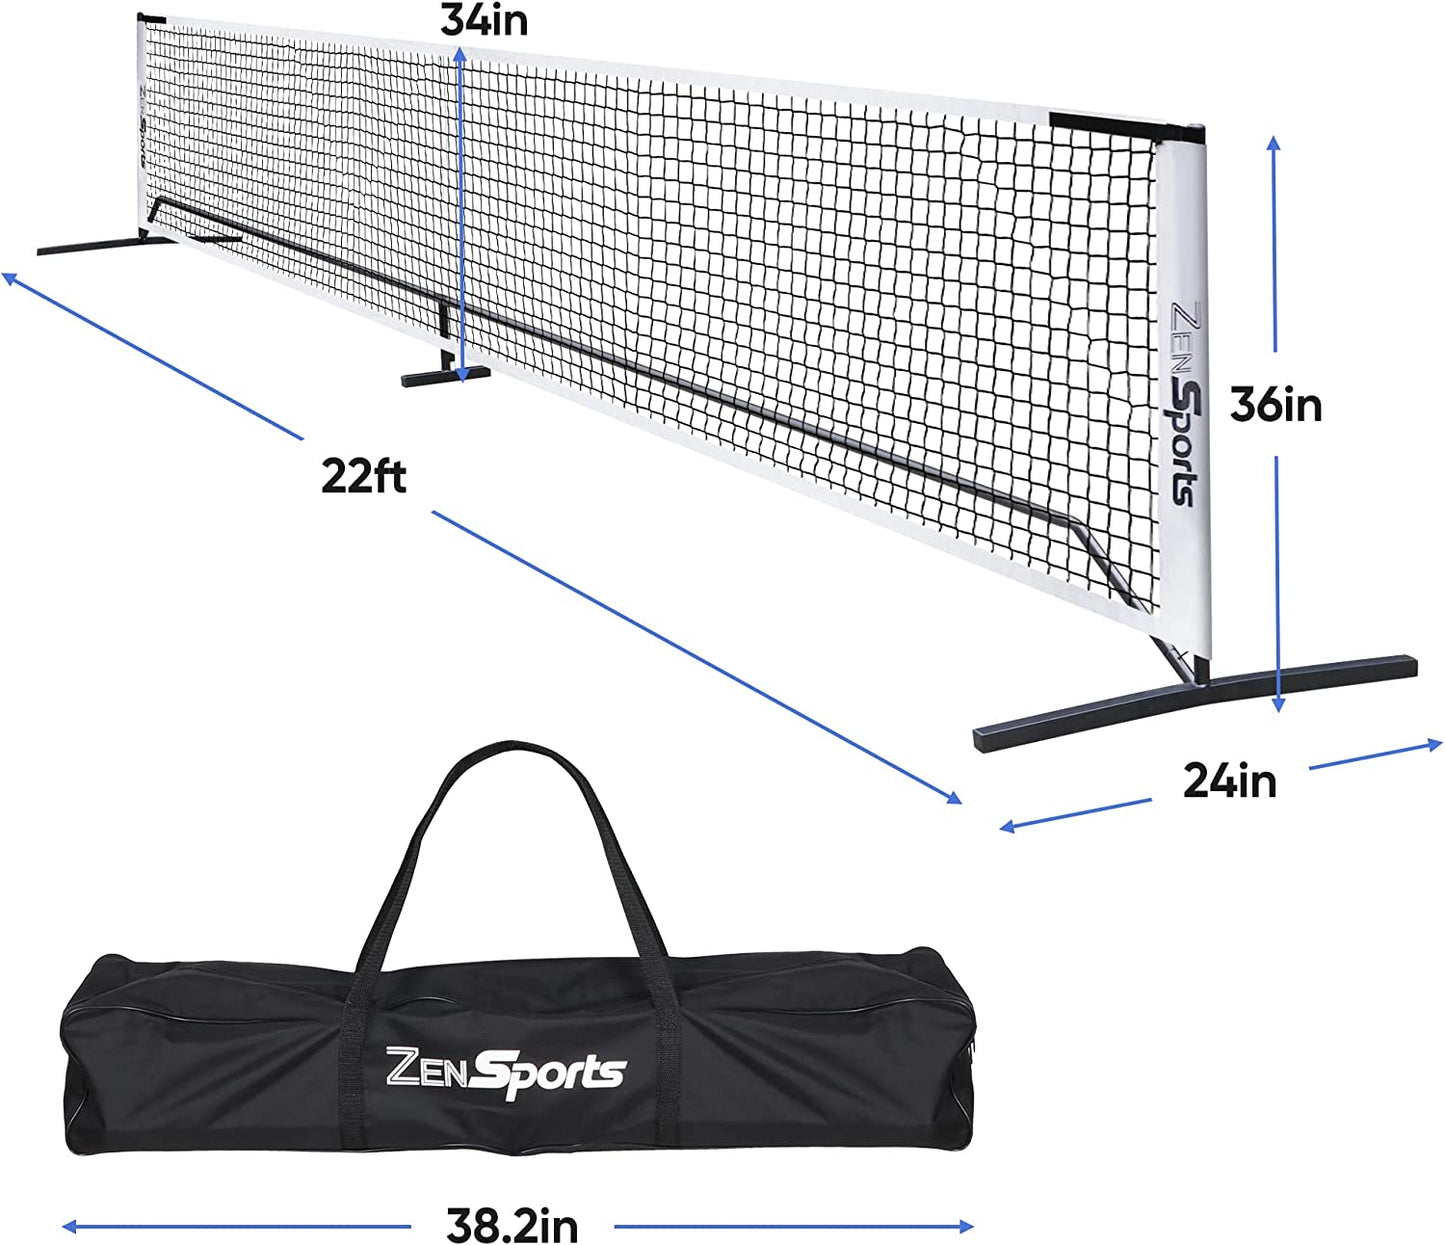 Portable Pickleball Net Set System with Metal Frame Stand and Regulation Size Net Including Carrying Bag Indoor Outdoor Game